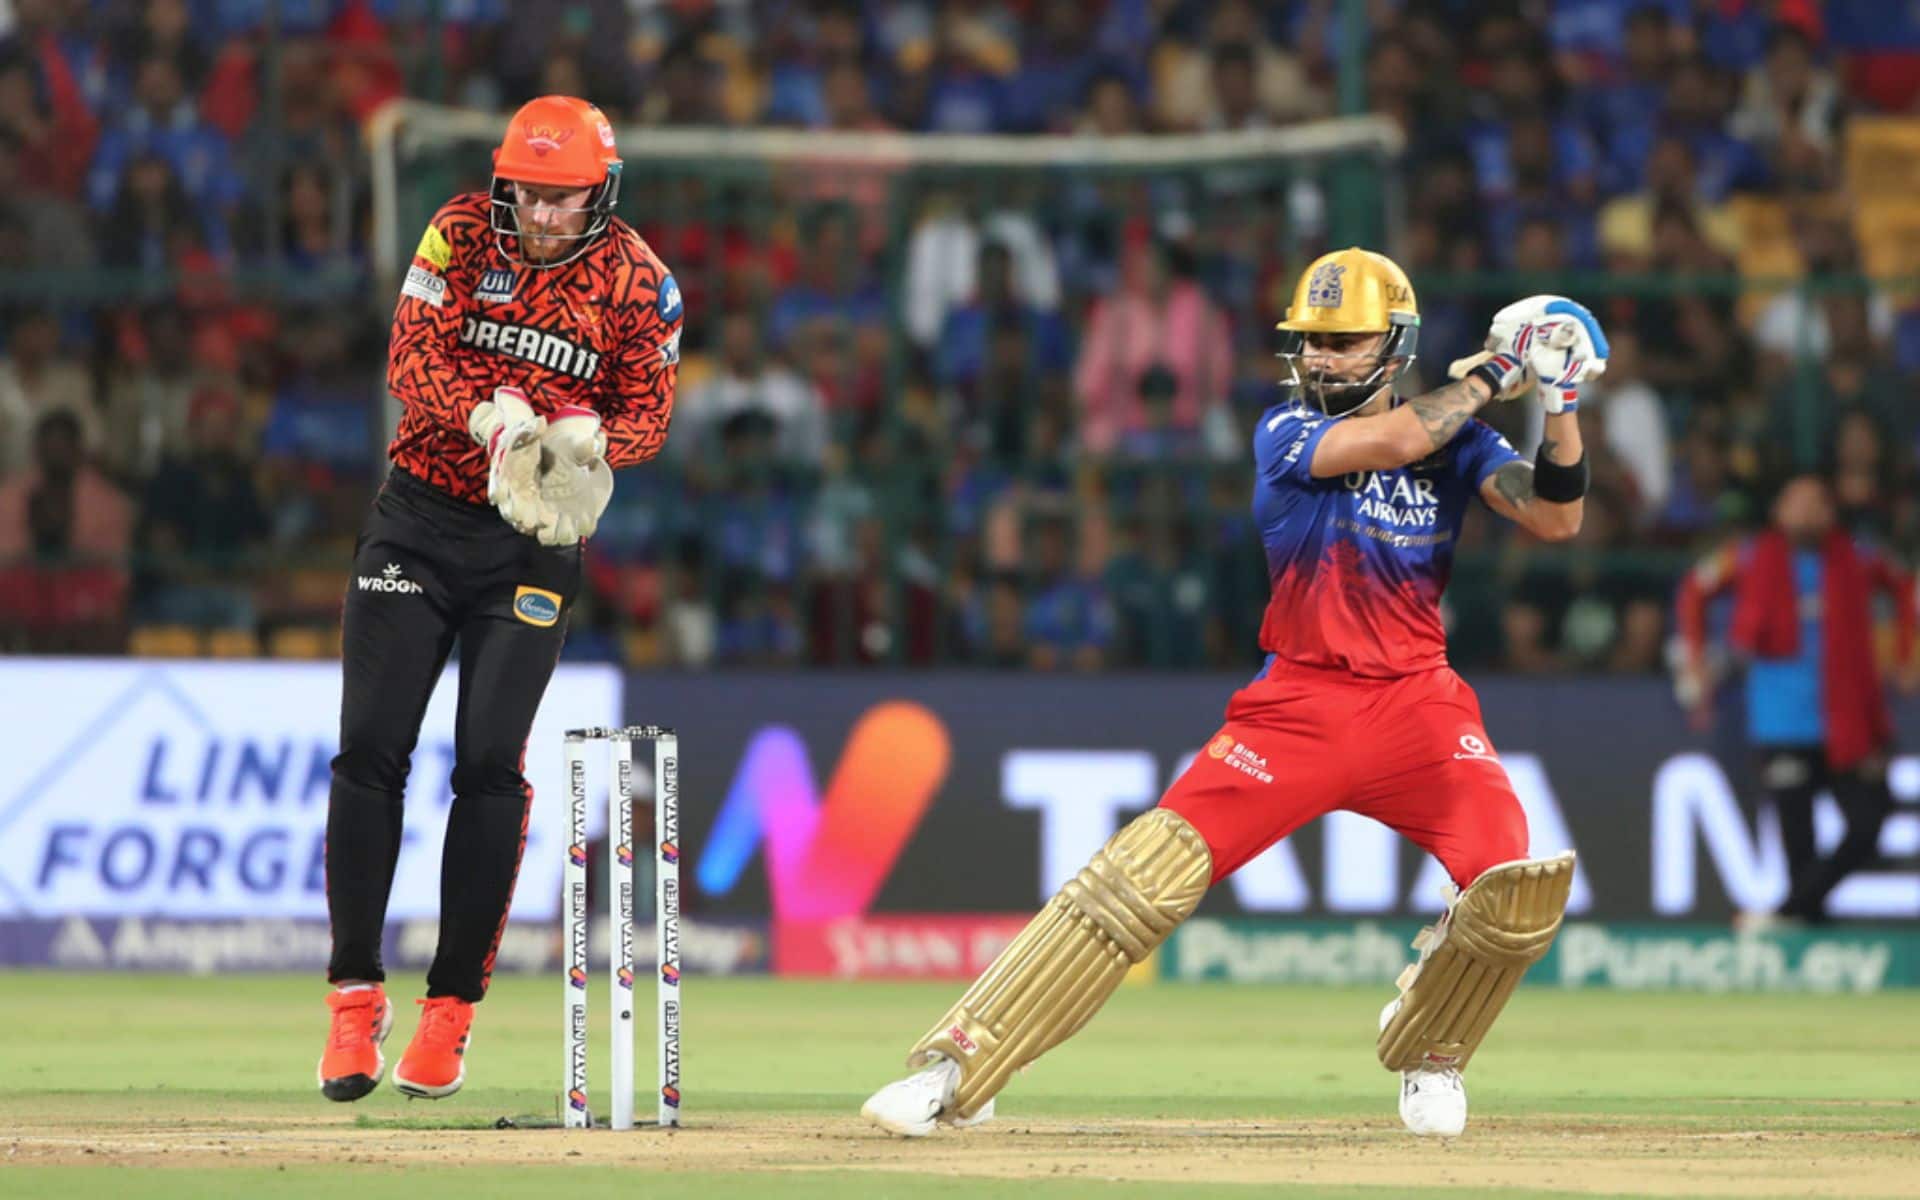 RCB's Dig At Kohli Critiques Goes Viral As He Shows Intent With 42 Runs At 210 S/R